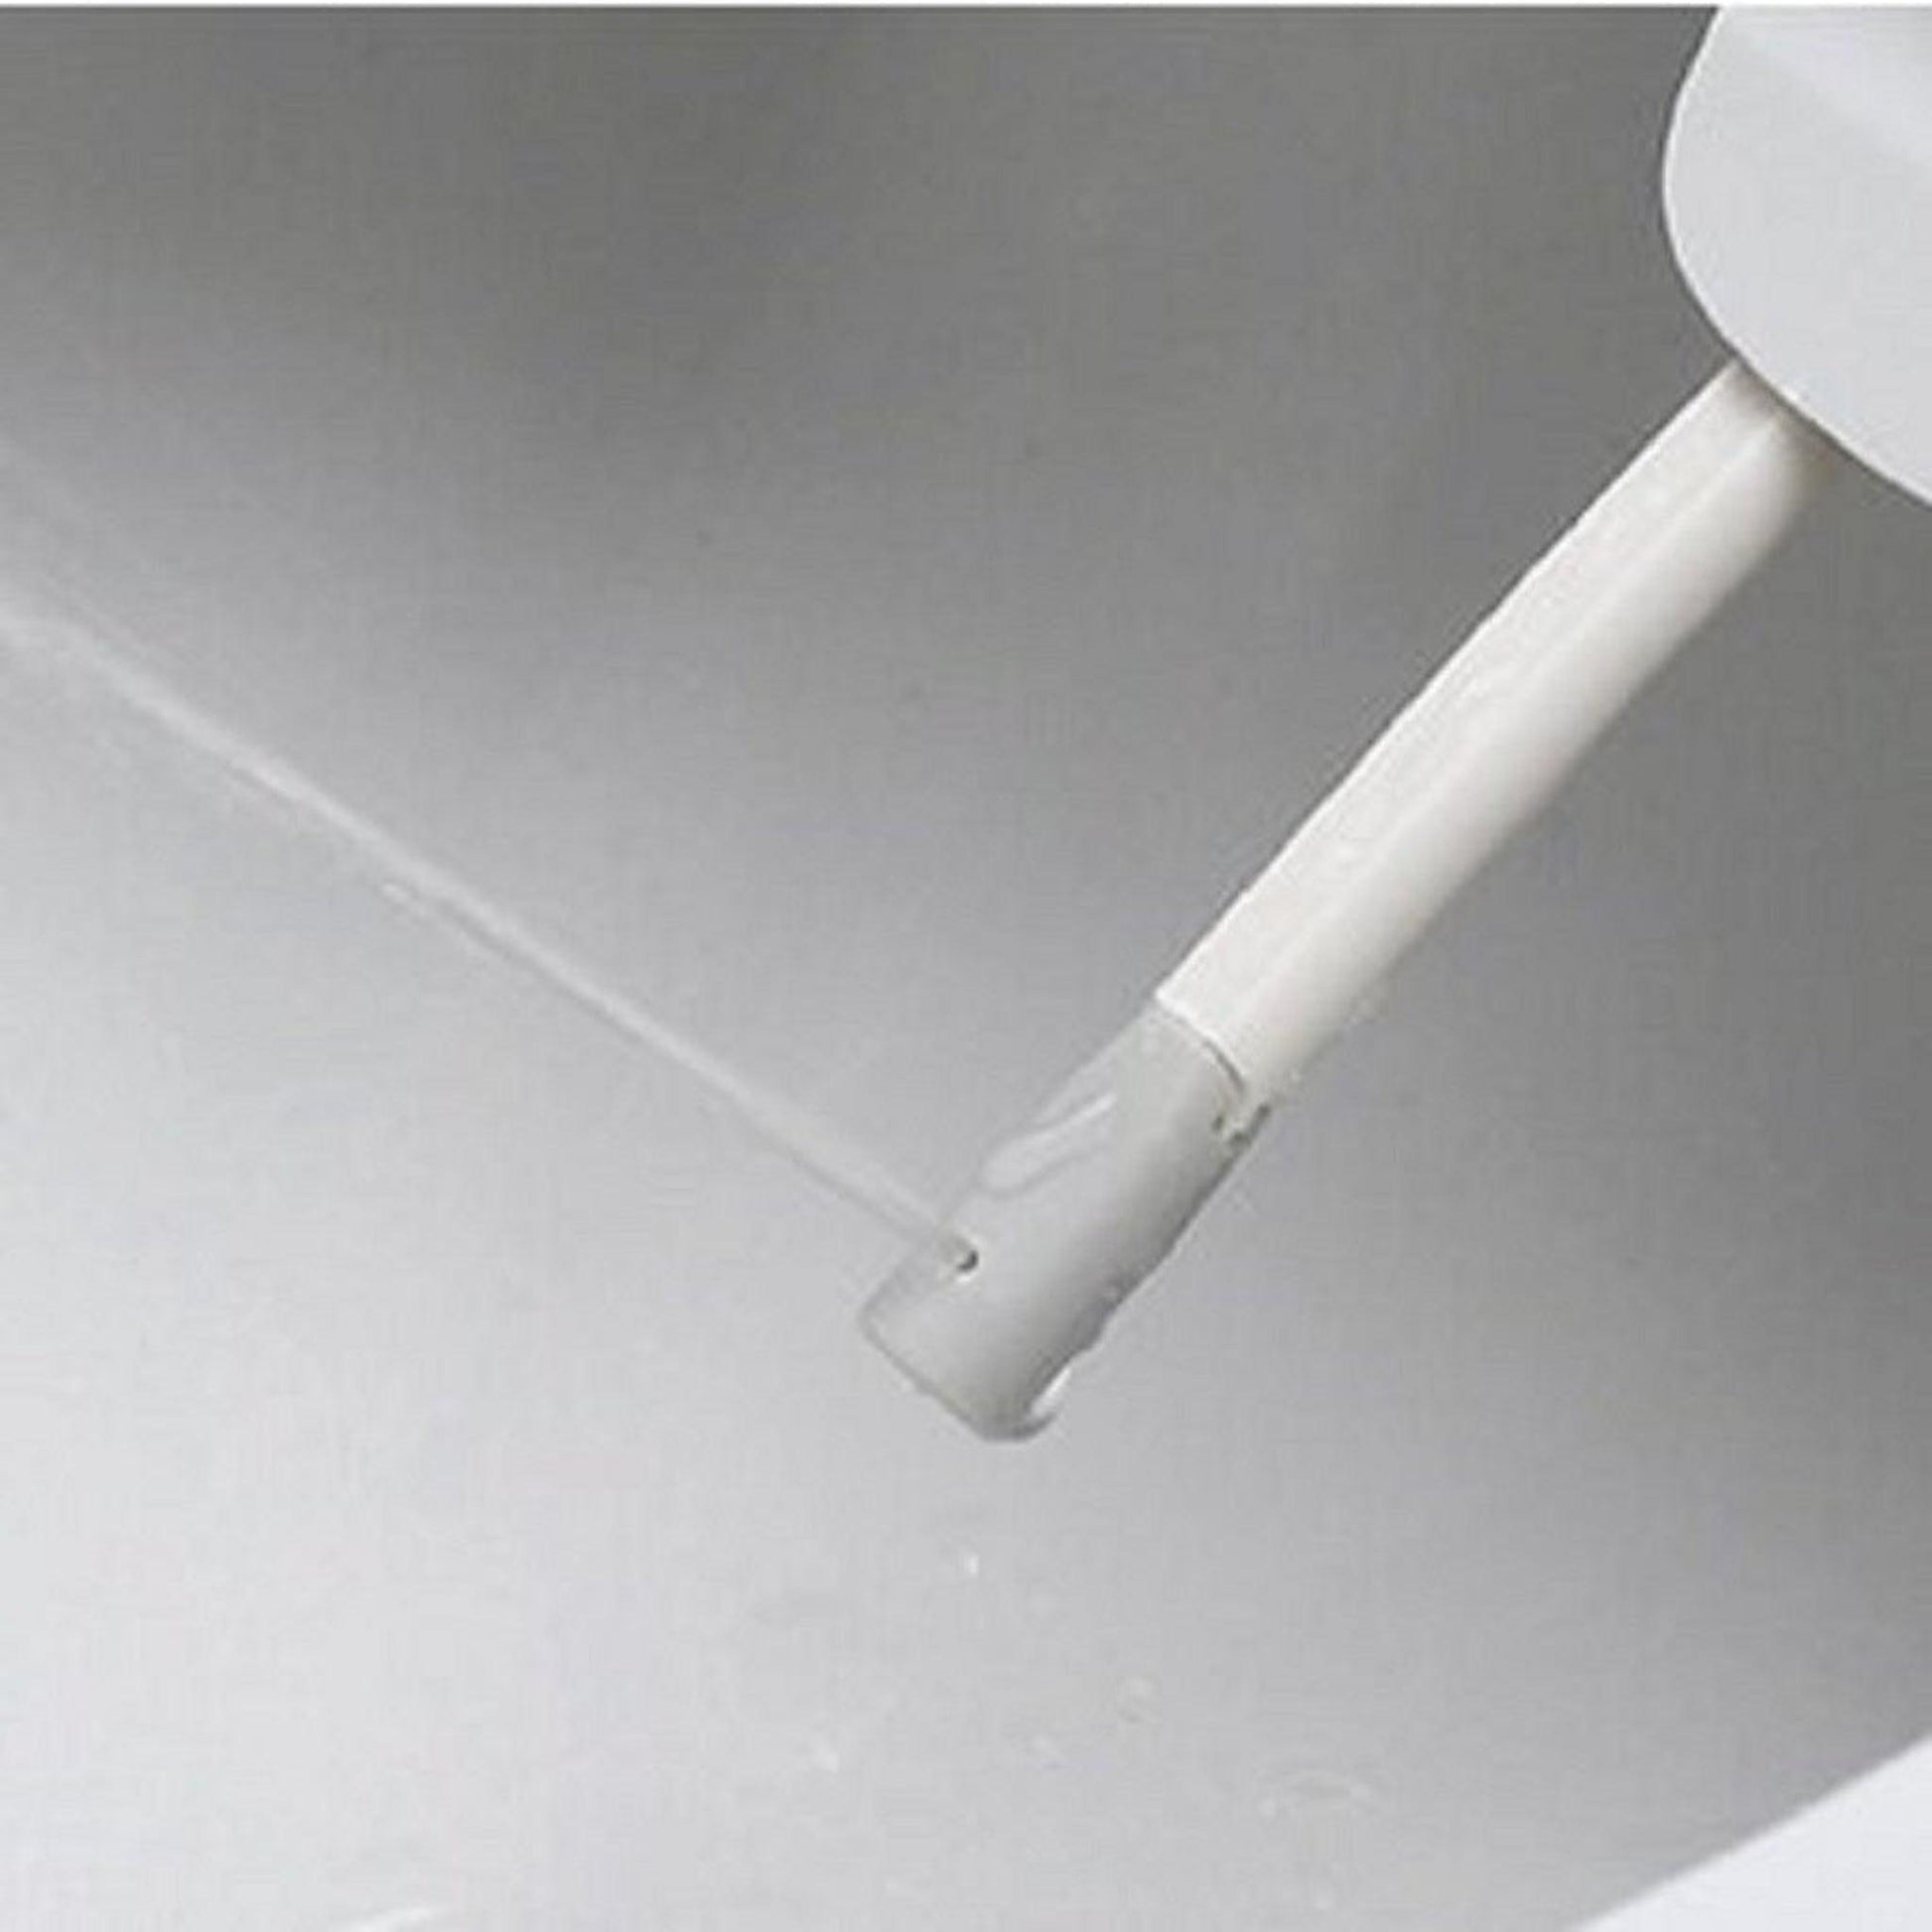 https://usbathstore.com/cdn/shop/products/Aim-to-Wash-20-Elongated-White-Electric-Smart-Bidet-Toilet-Seat-With-Knob-Control-Operation-7.jpg?v=1669836938&width=1946